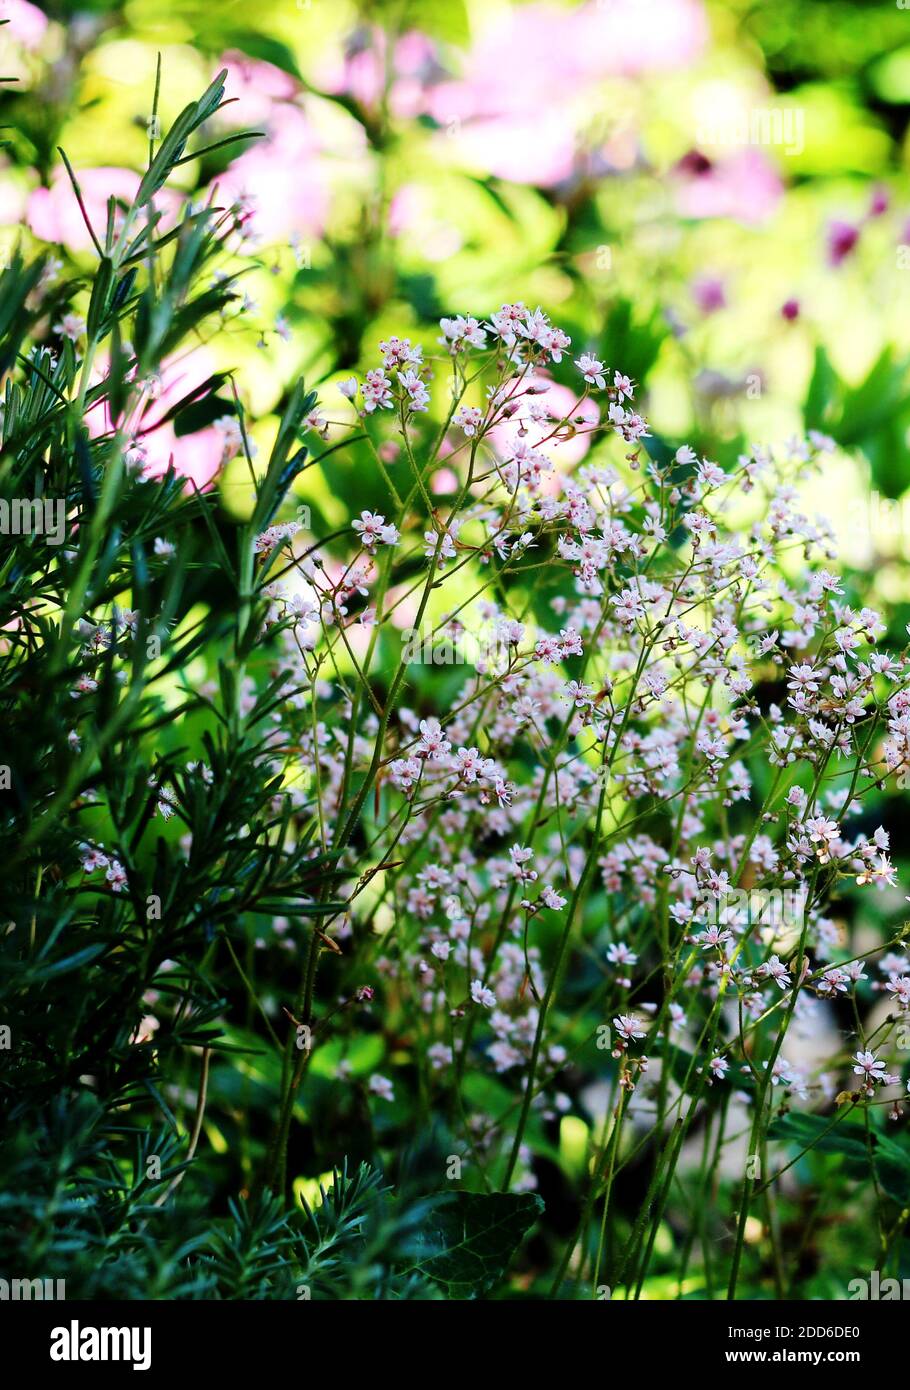 Shady garden spot - the delicate pink flowers of Saxifraga x urbium (London Pride) with rosemary and backed by a pink haze of rhododendron Stock Photo